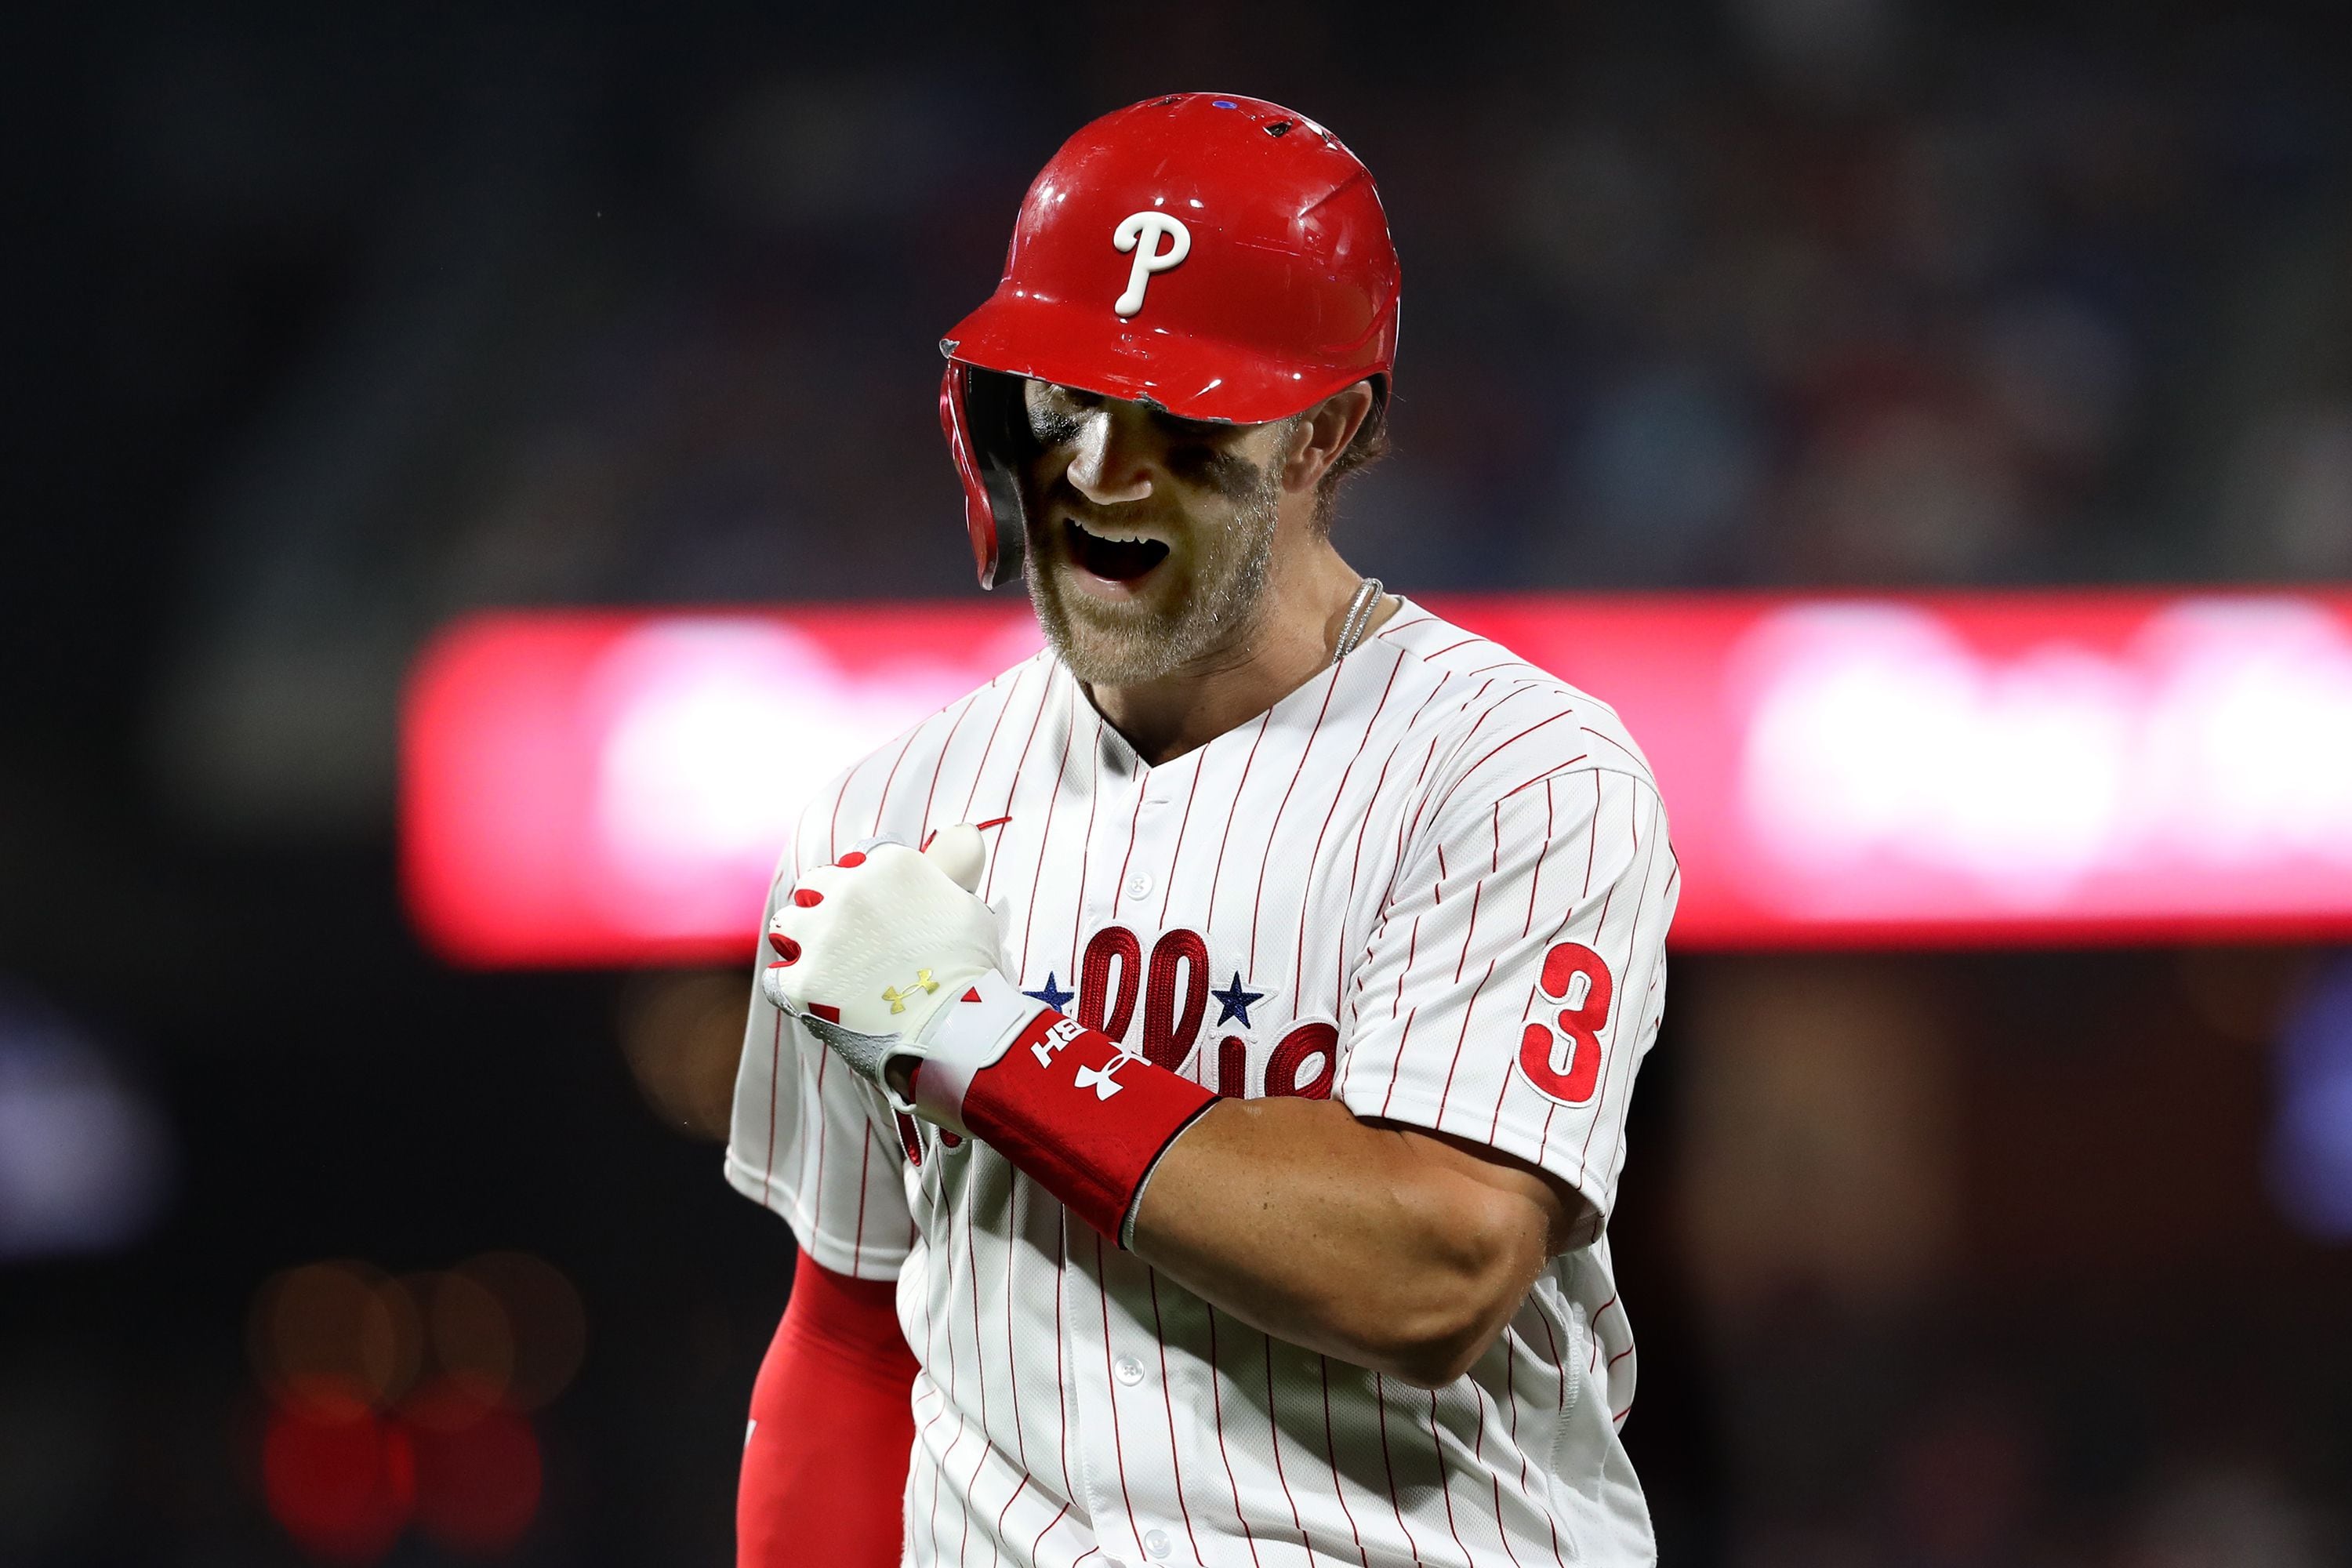 Playoffs? These stats show what the Phillies are up against to